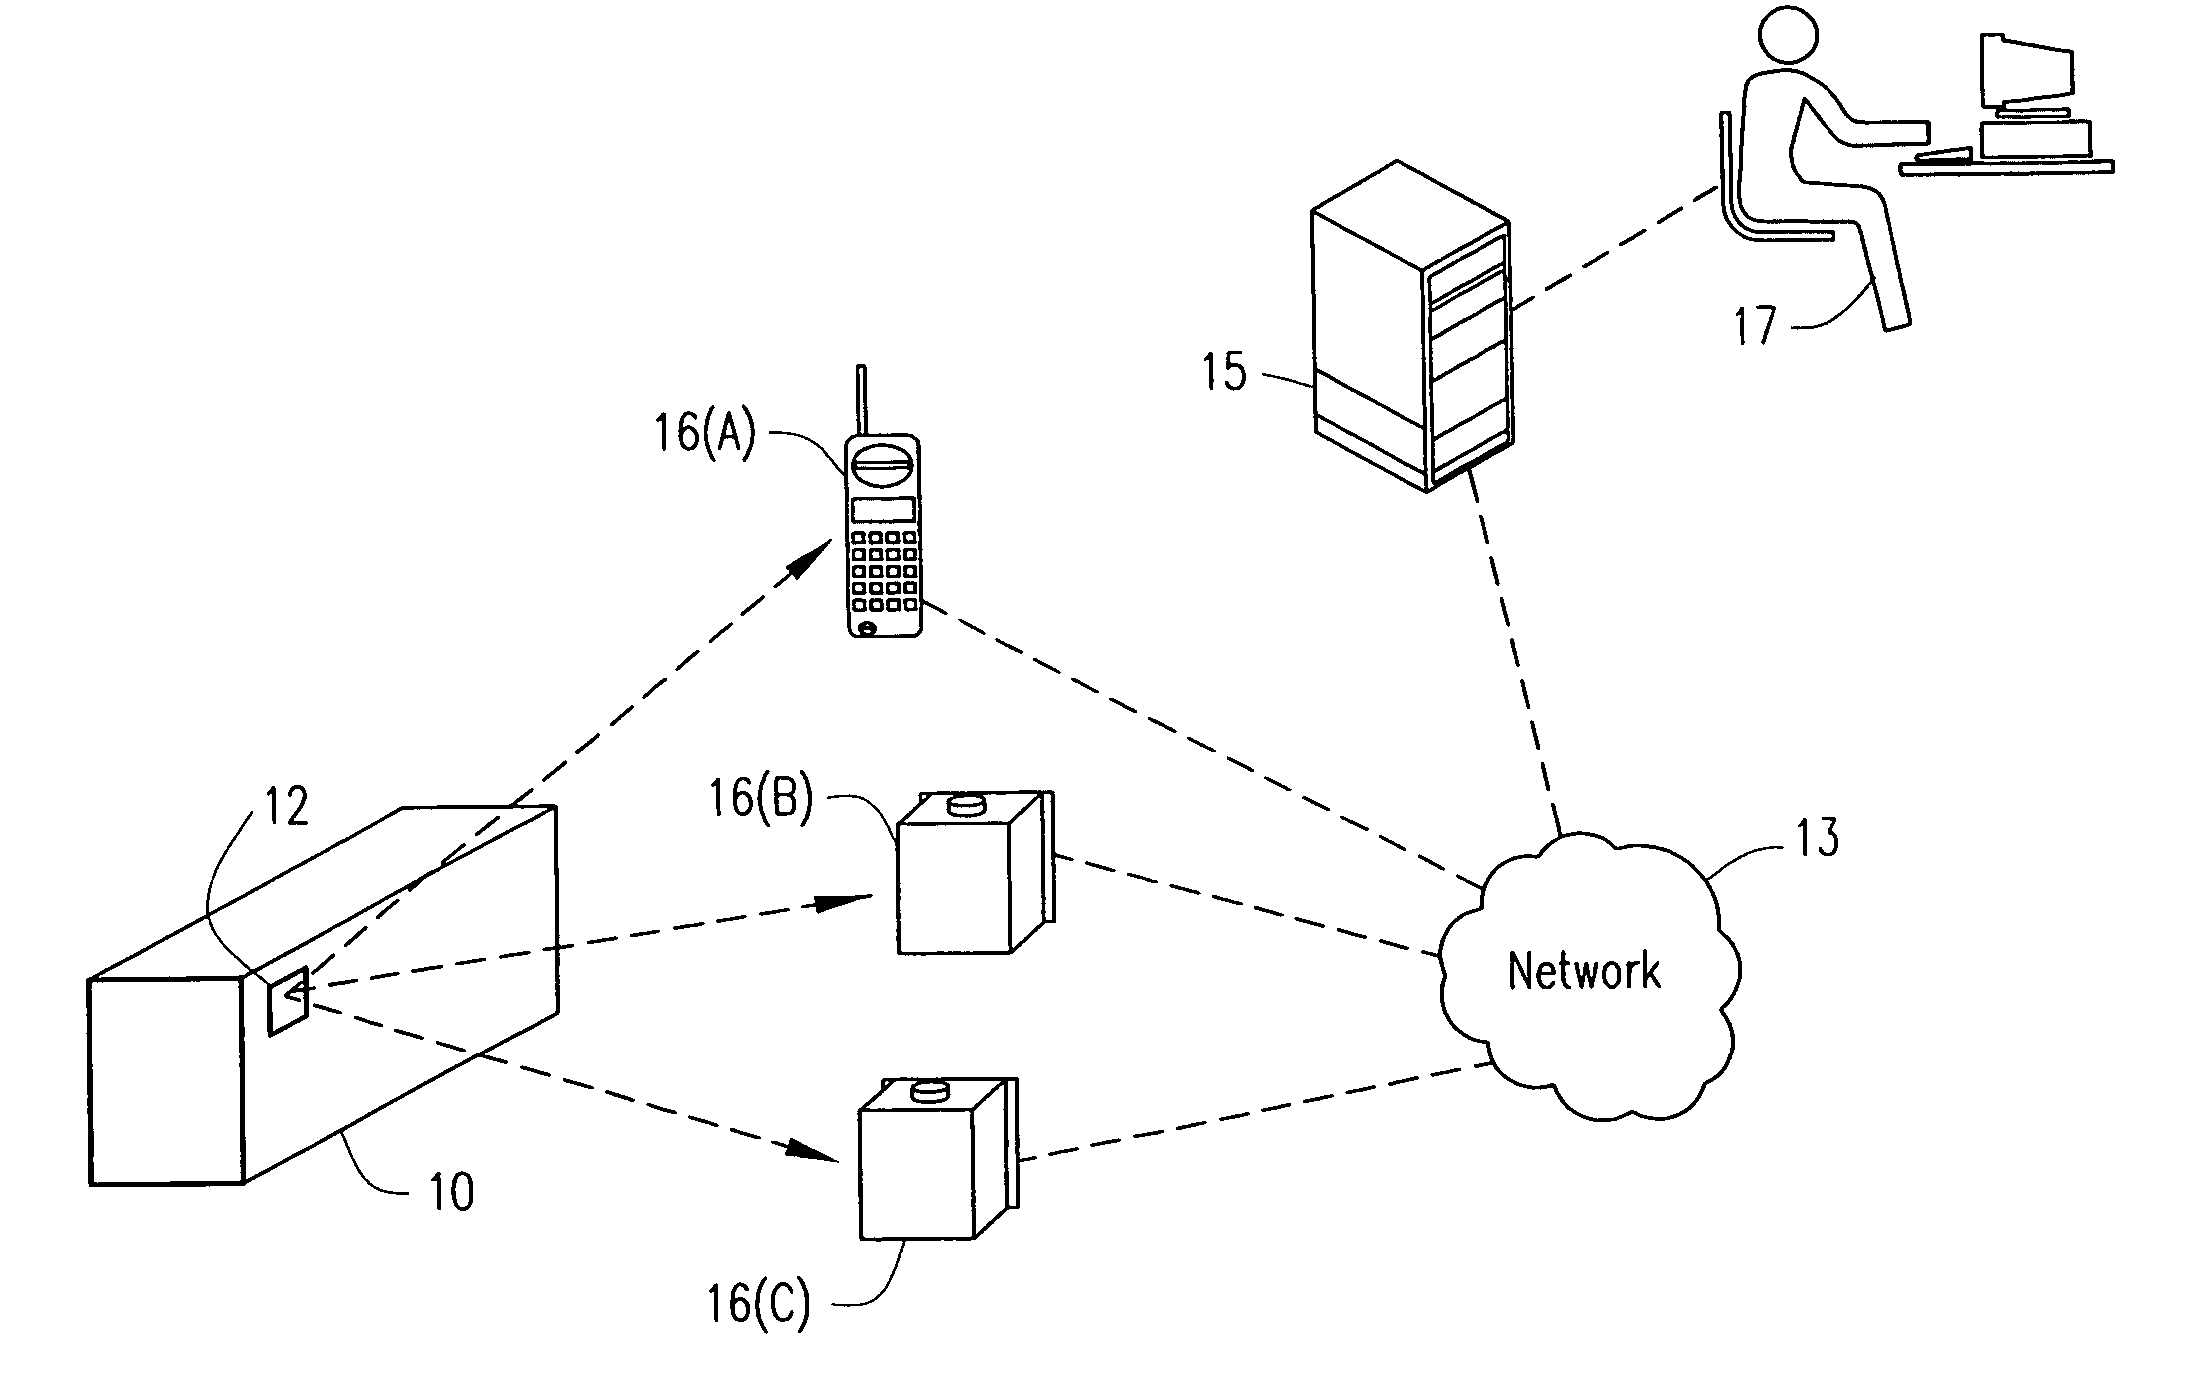 Method and system for monitoring containers to maintain the security thereof